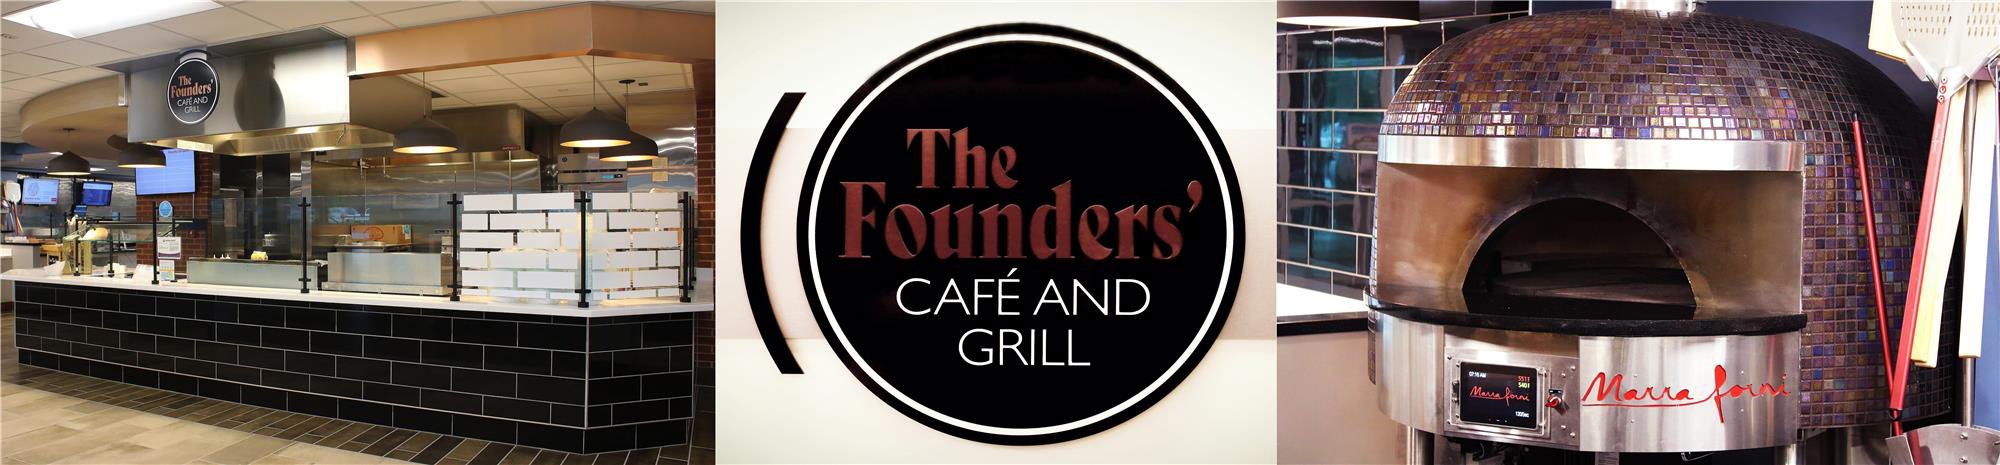 The Founders' Café and Grill